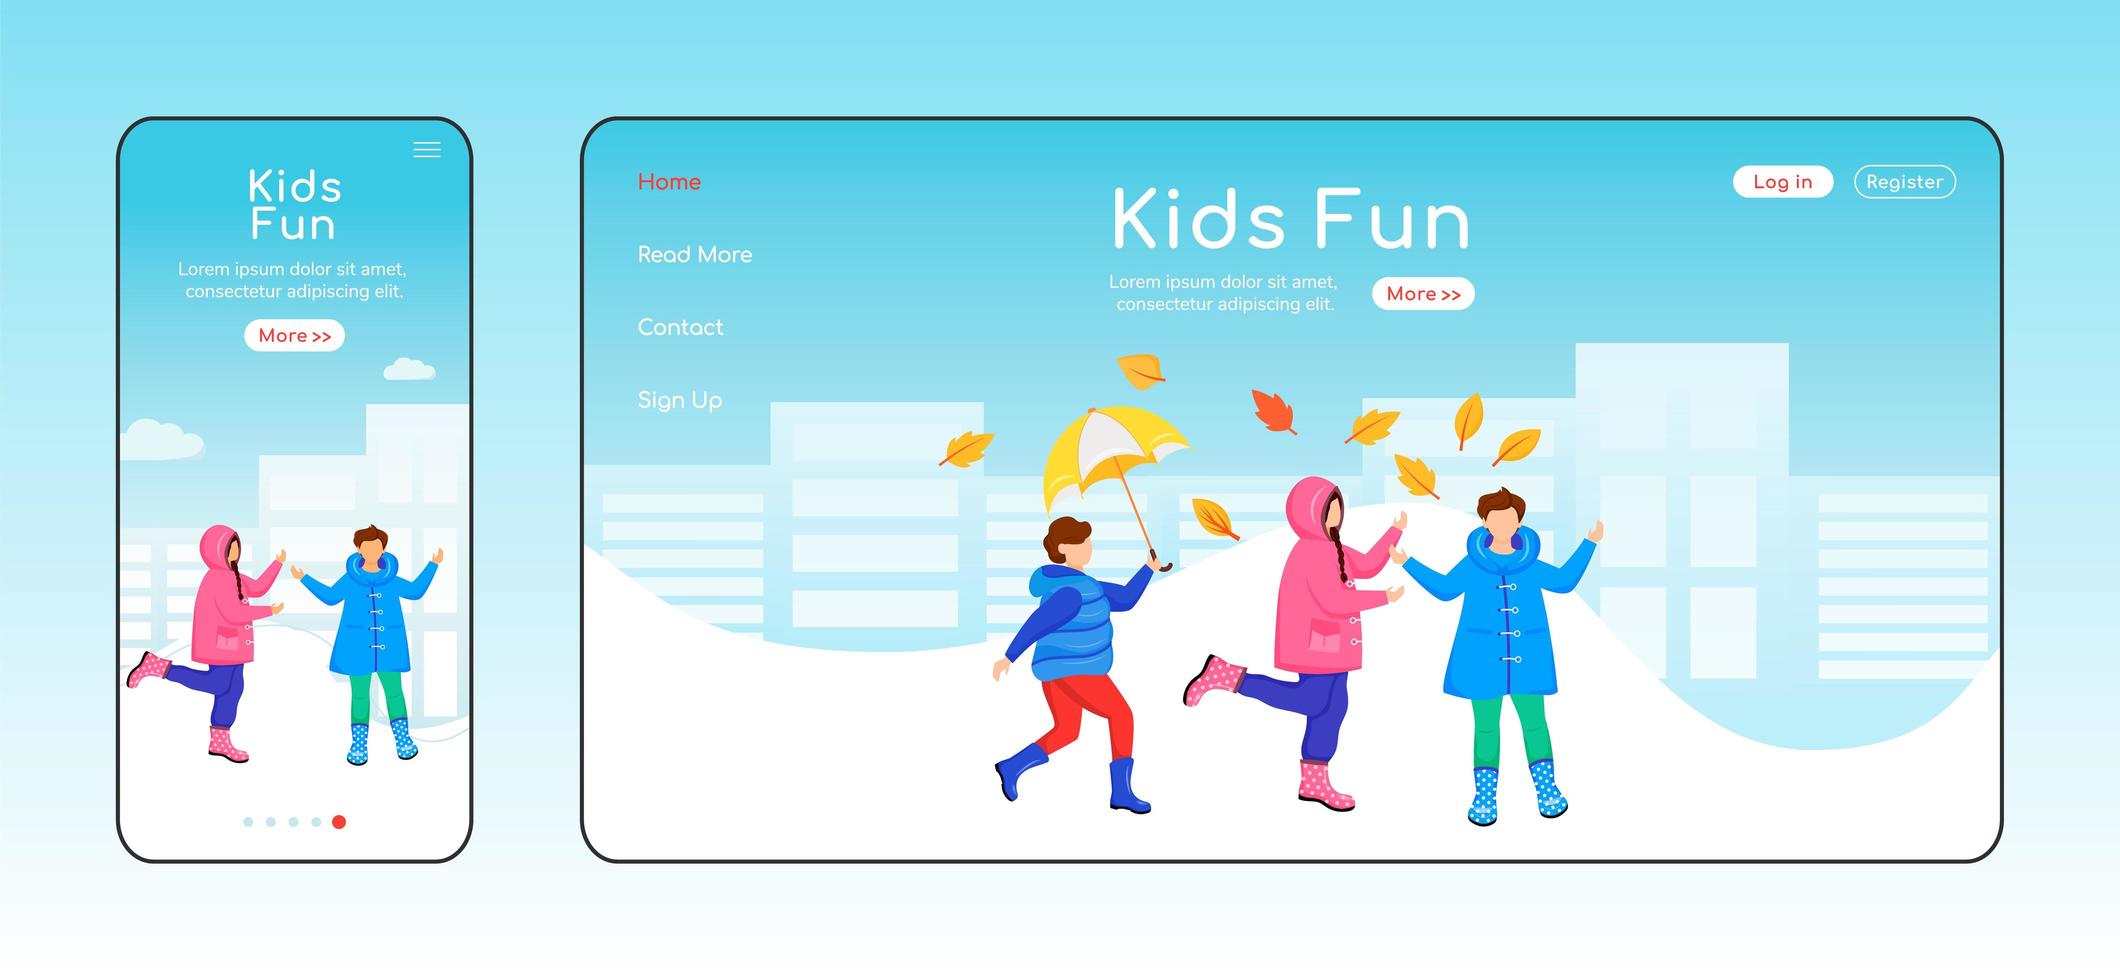 Kids fun landing page flat color vector template